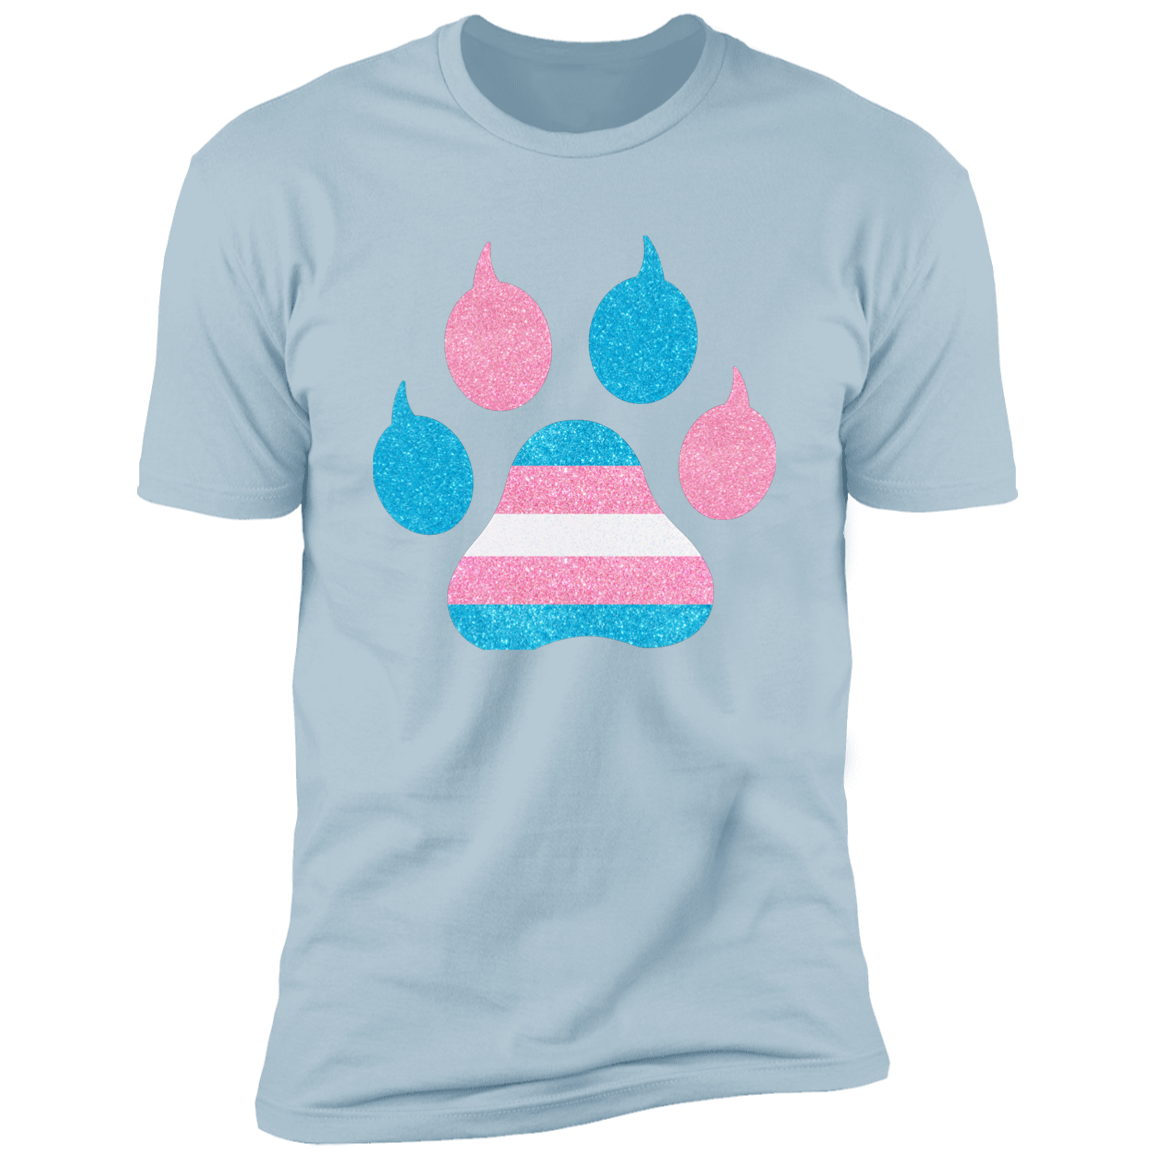 Trans Pride Cat Paw trans pride t-shirt,  trans cat paw pride shirt for humans, in light blue